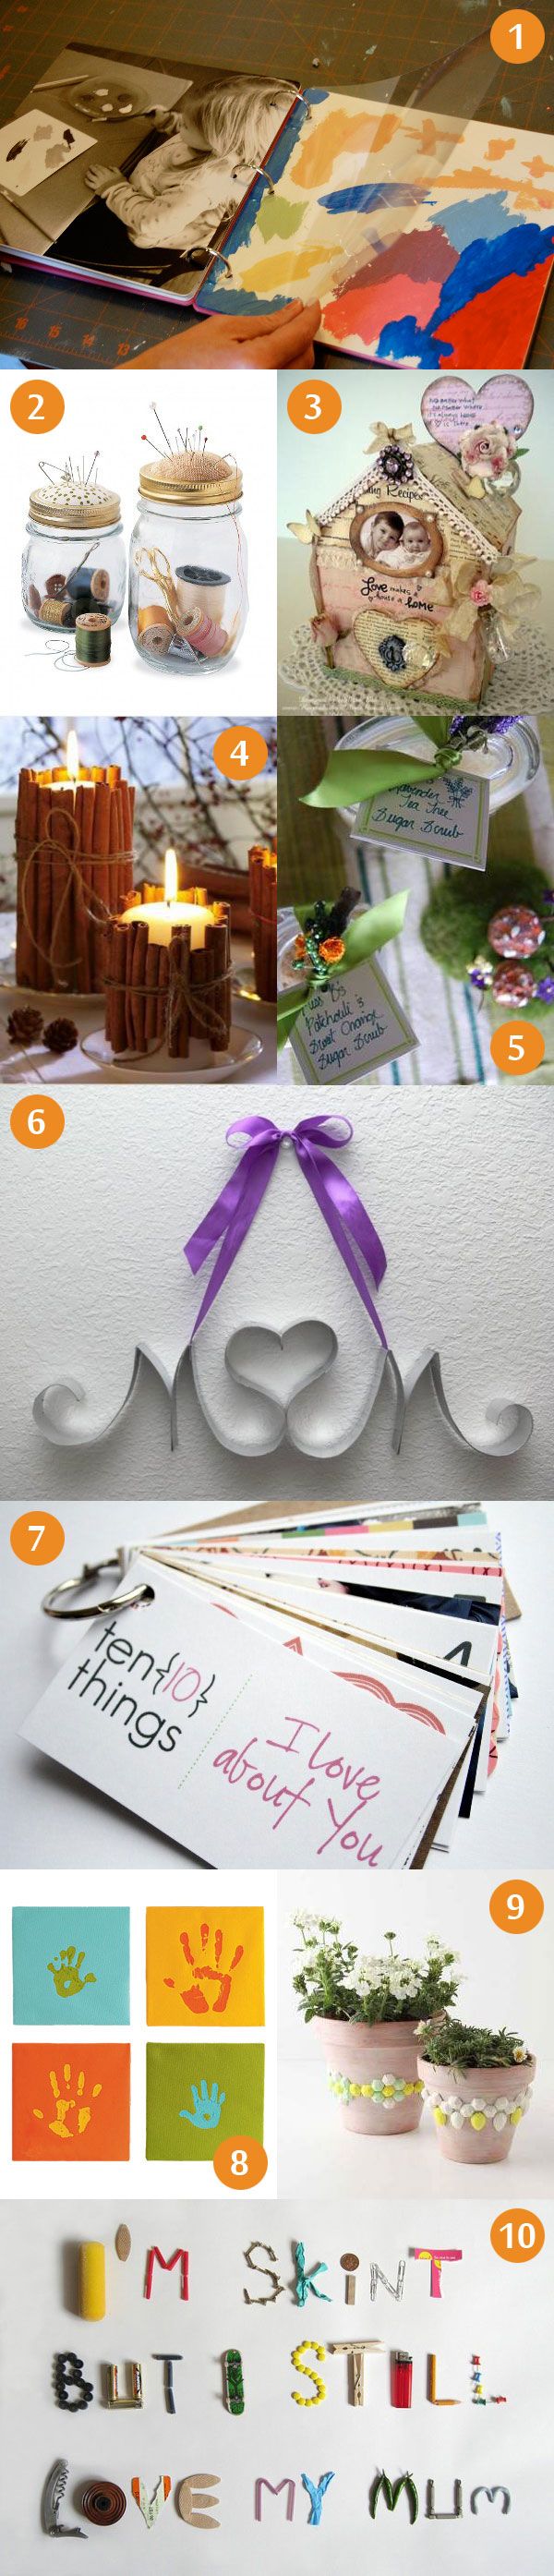 DIY Mother's day gifts